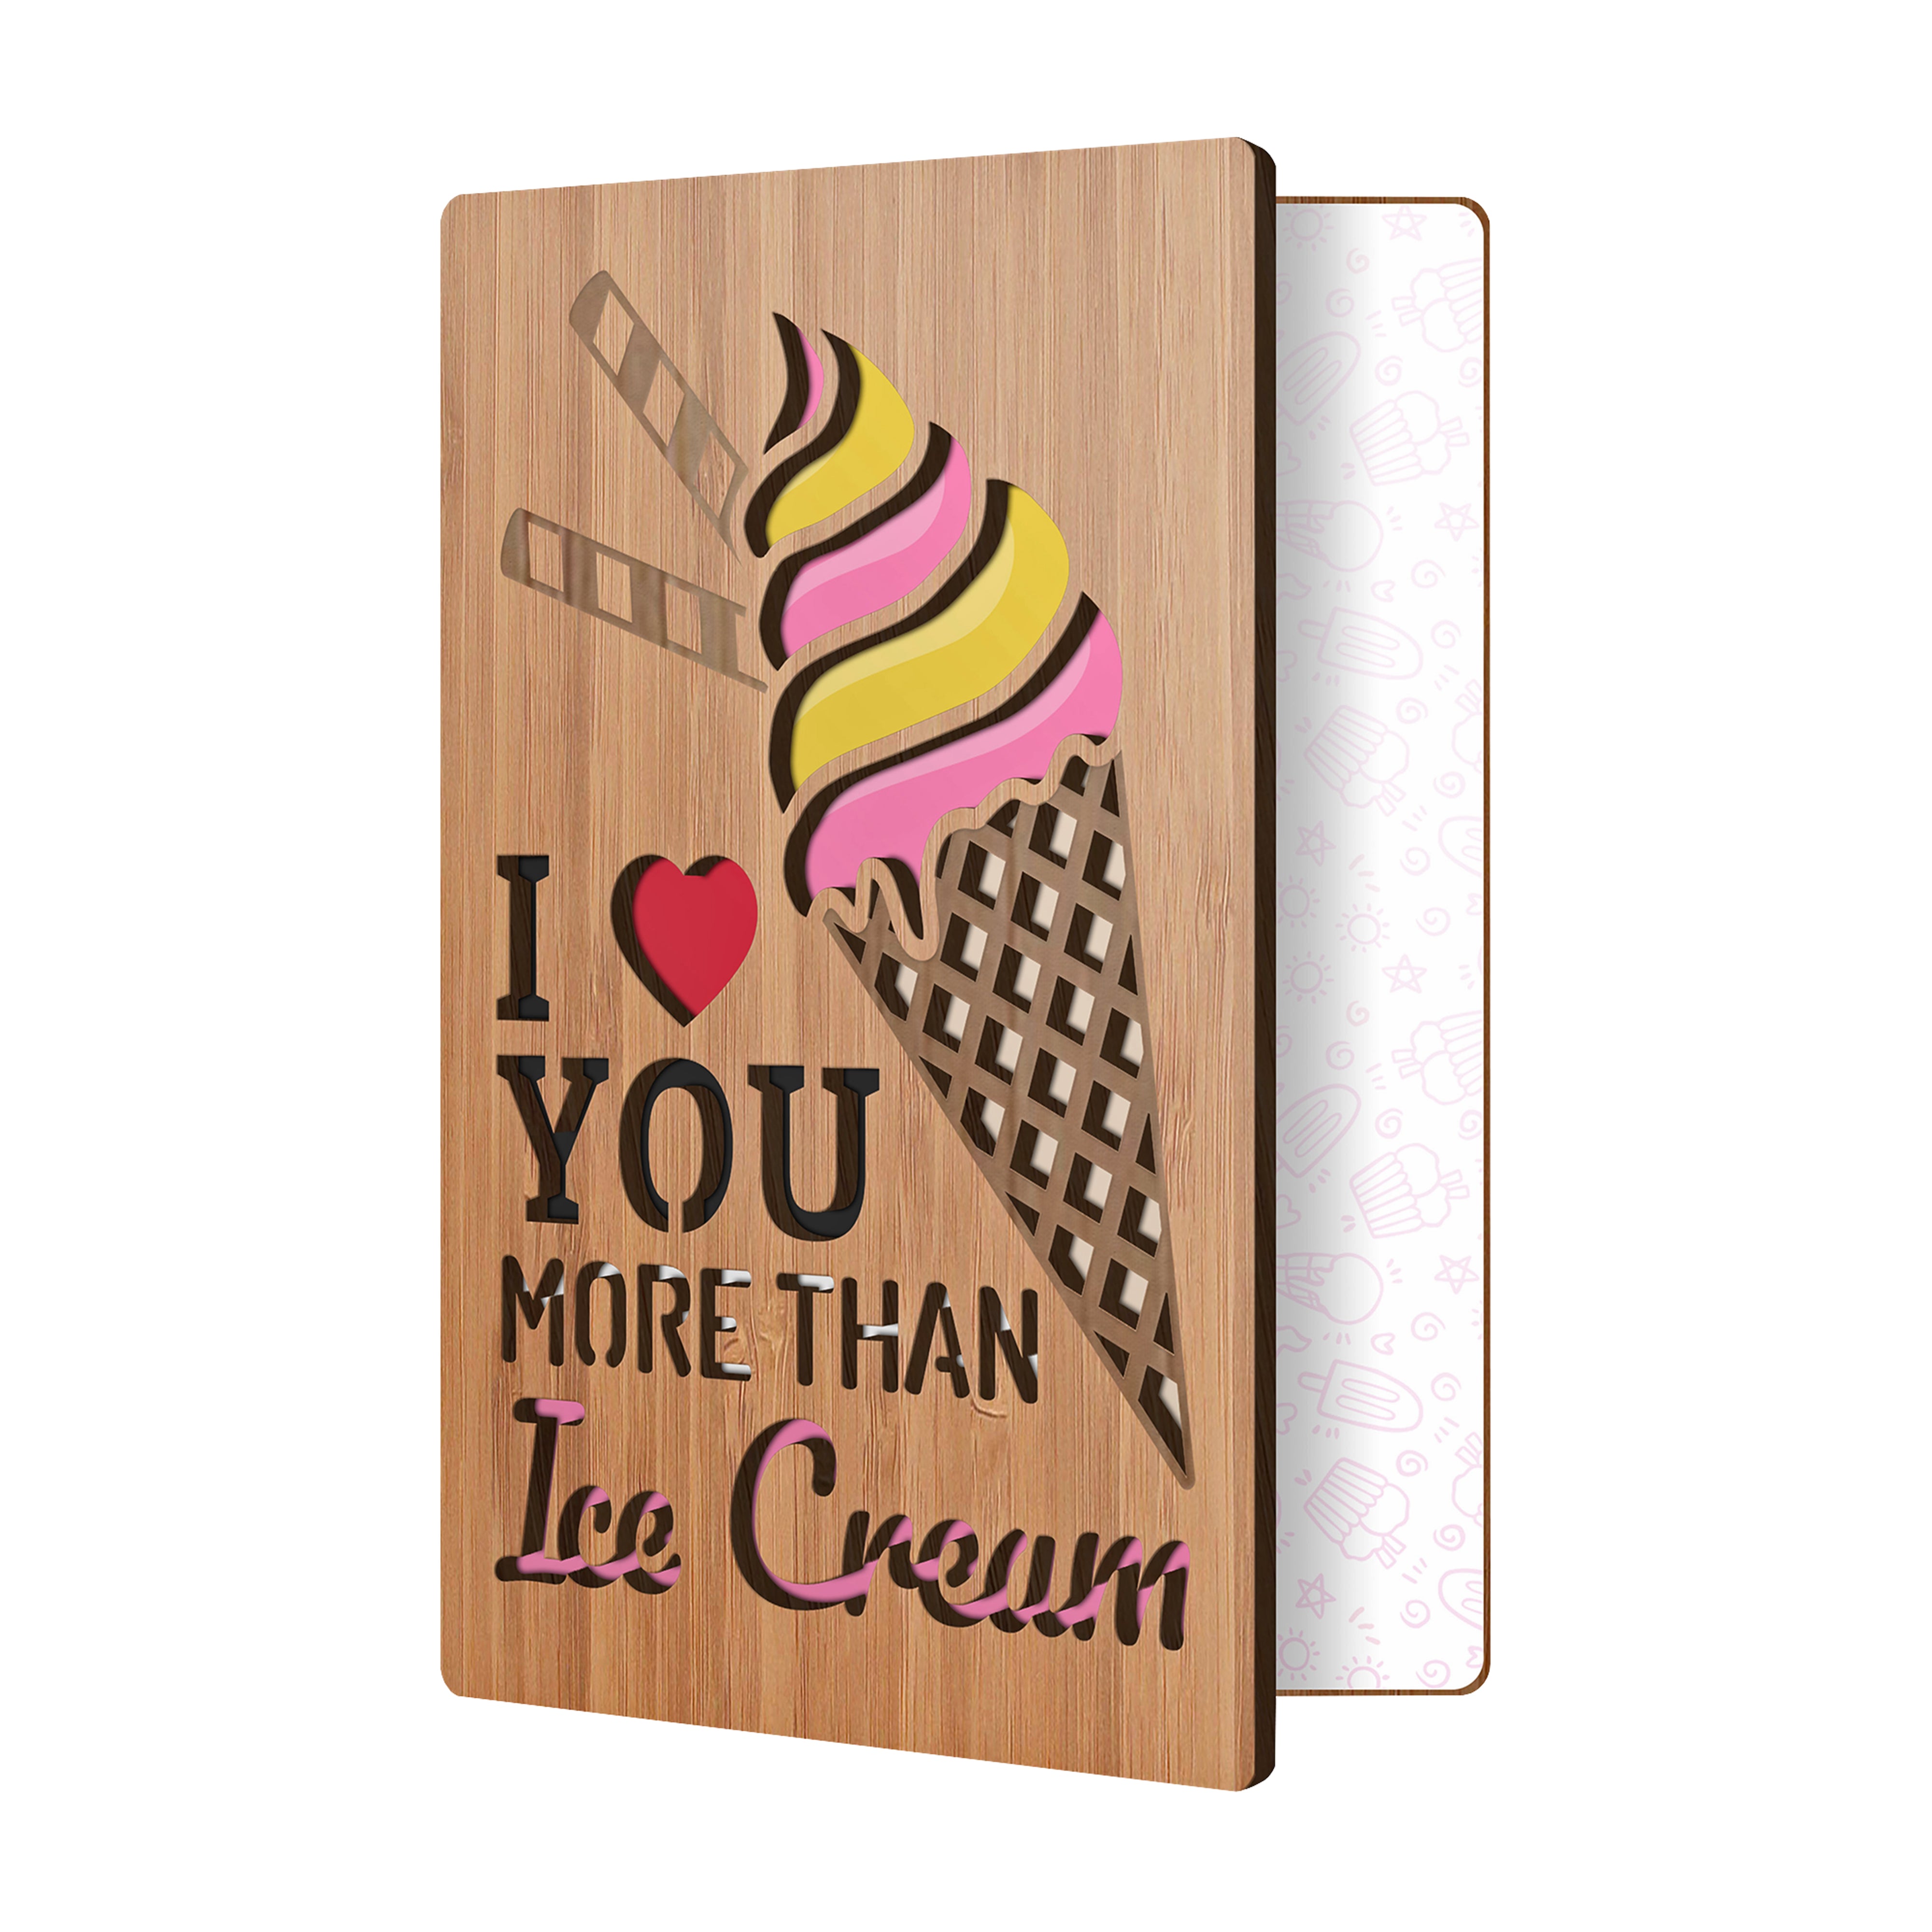 HeartSpace | Valentines Day Cards | Handmade Sustainable Bamboo Love Cards | Anniversary Cards for Wife, Husband, Girlfriend | Wooden Memorable & Unique Valentines Gifts for Her, Him | I Love You More Than Ice Cream